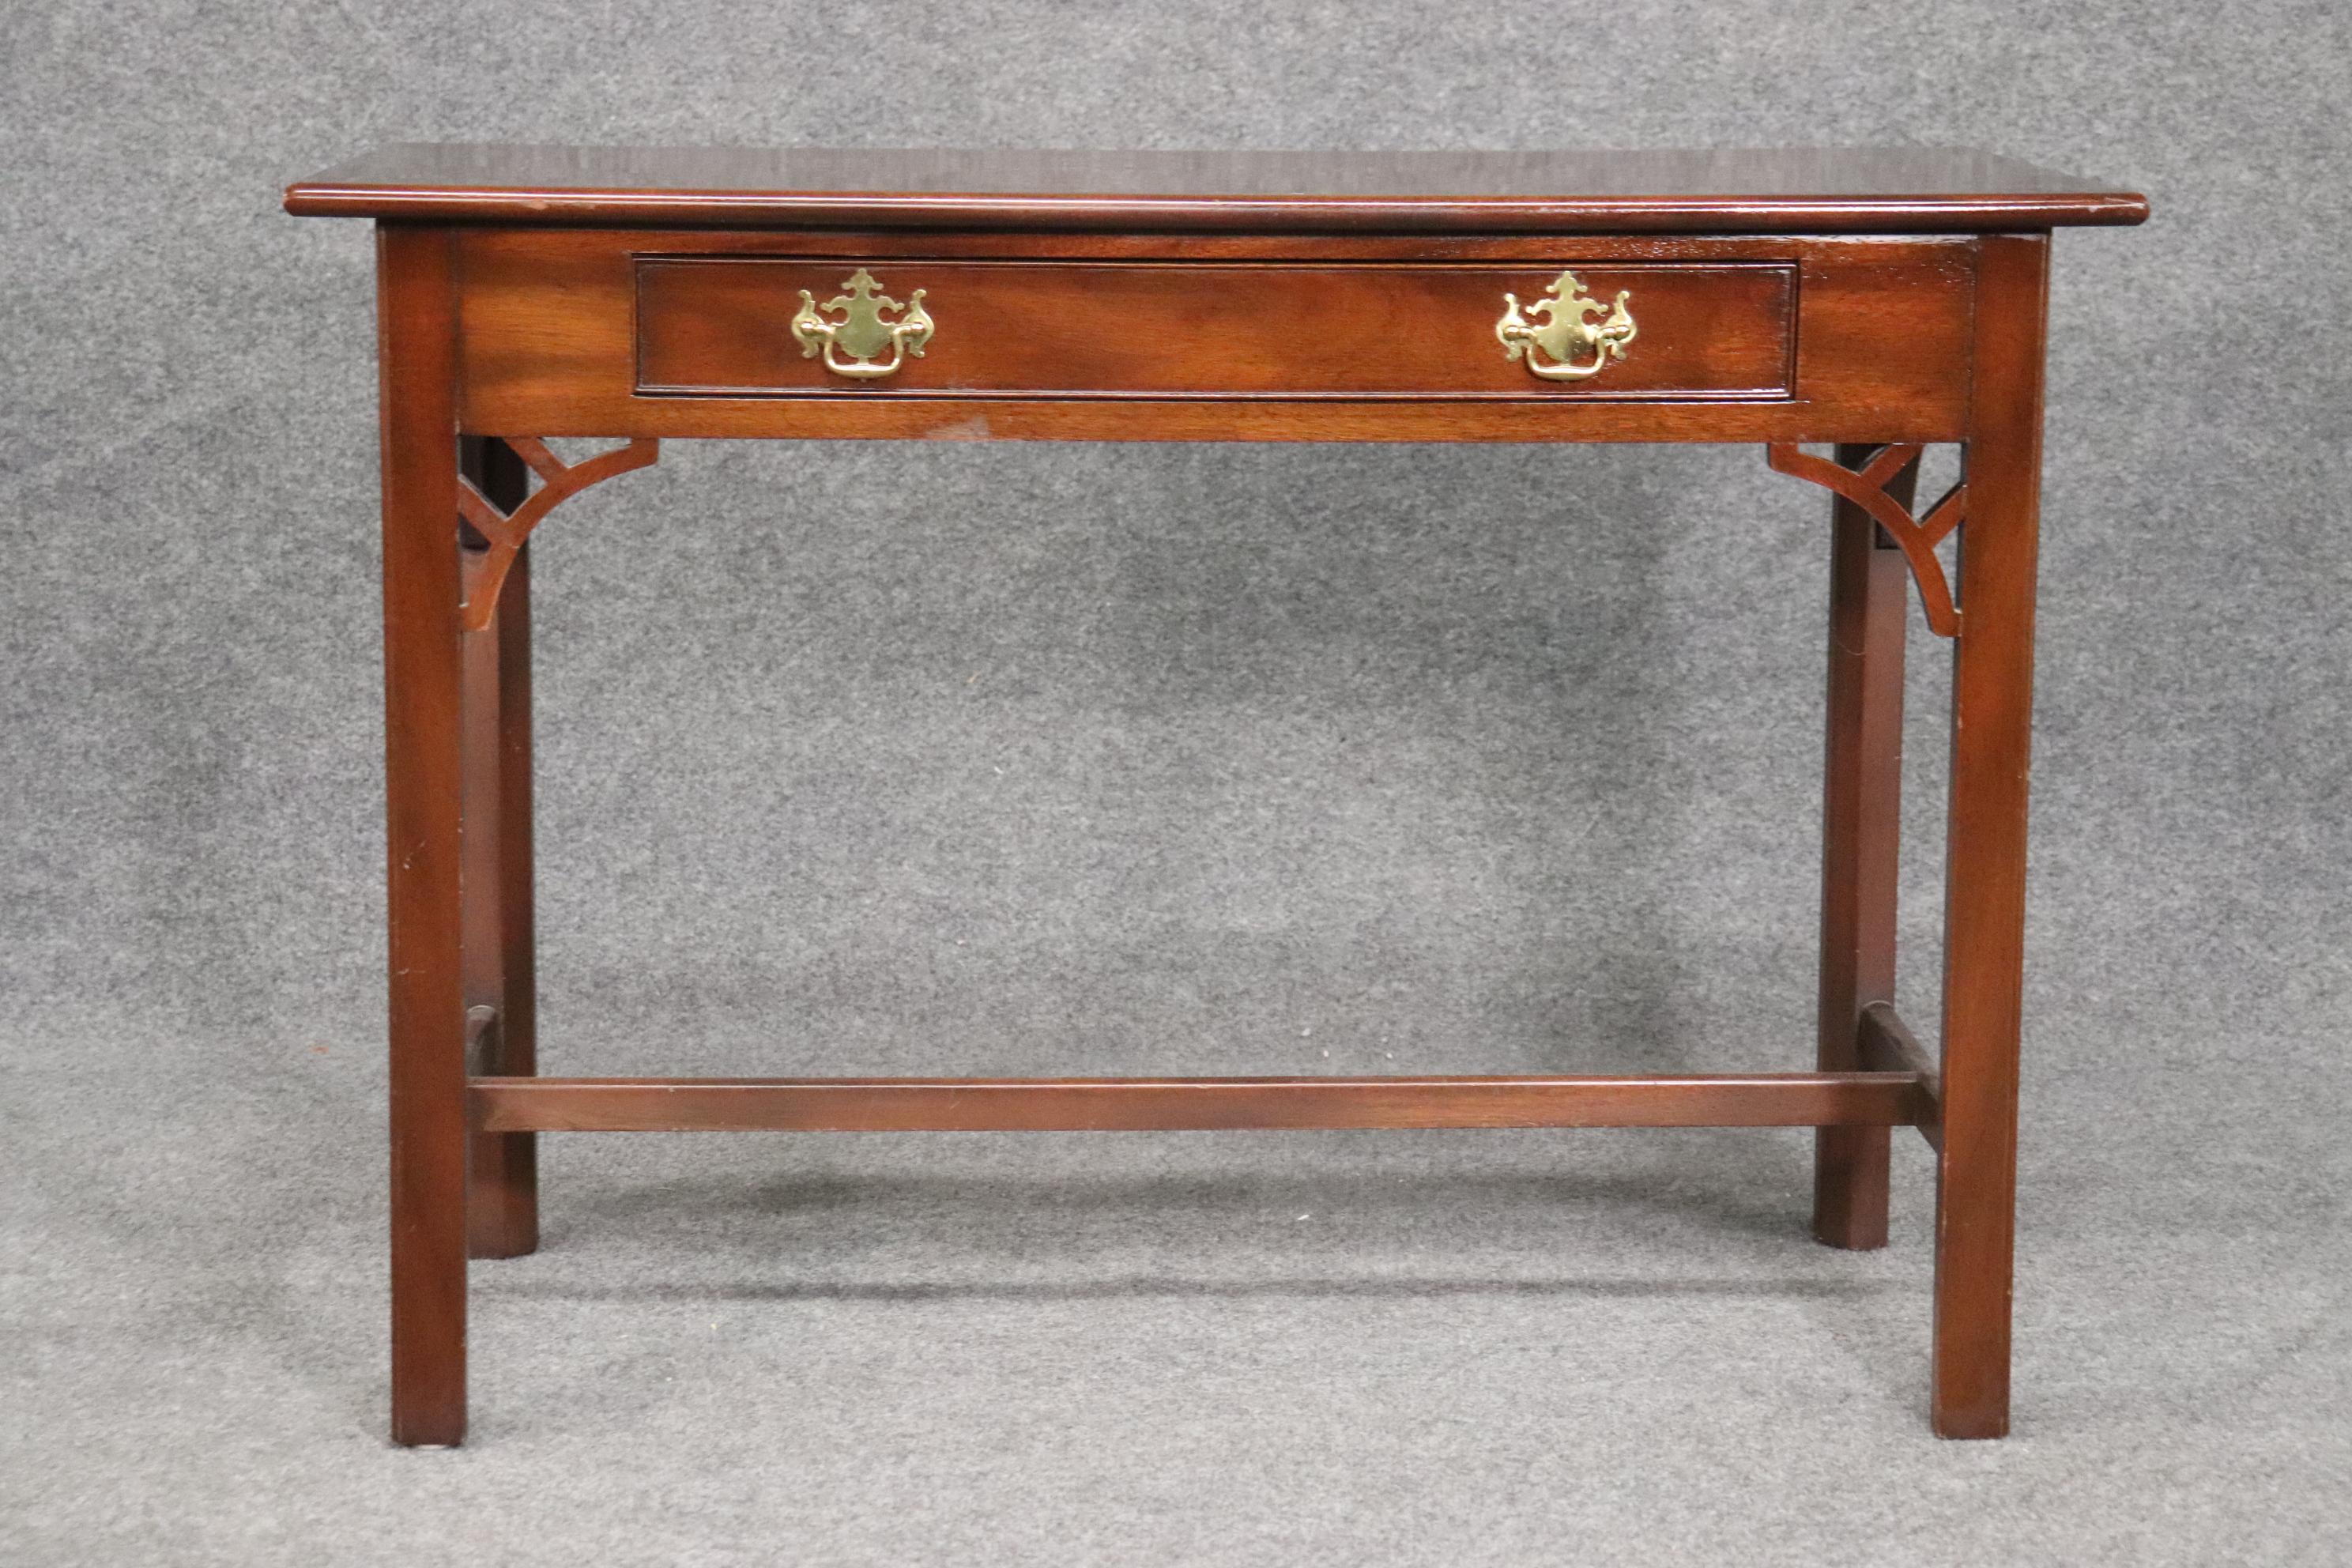 This is one of the more distinguished collections by Kittinger and is solid mahogany and designed in the Chippendale style. The desk measures 42 wide x 30 tall x 21 deep.